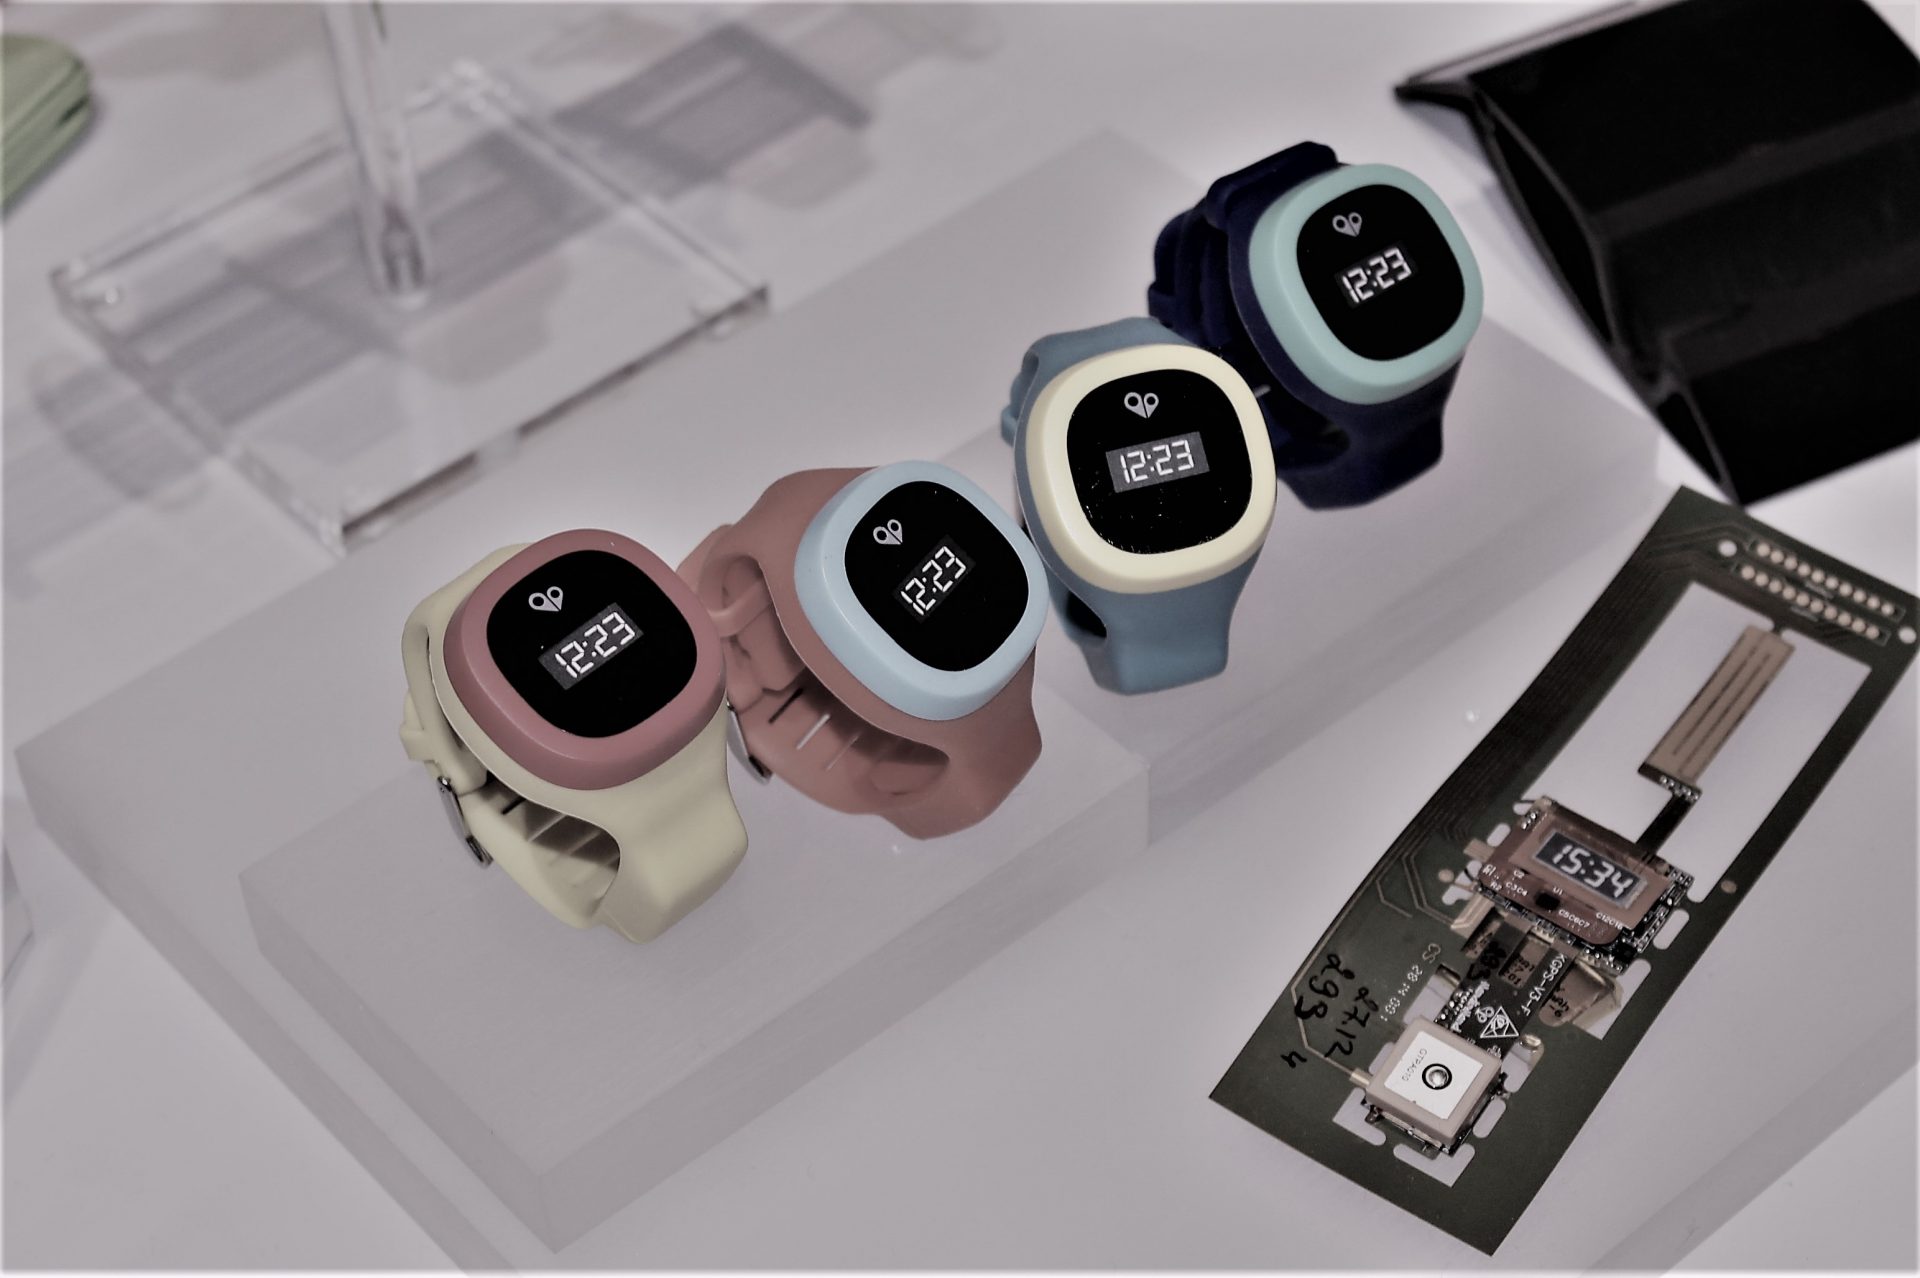 Imoo leads the Global Kids' Smartwatch Market With 26% Market Share